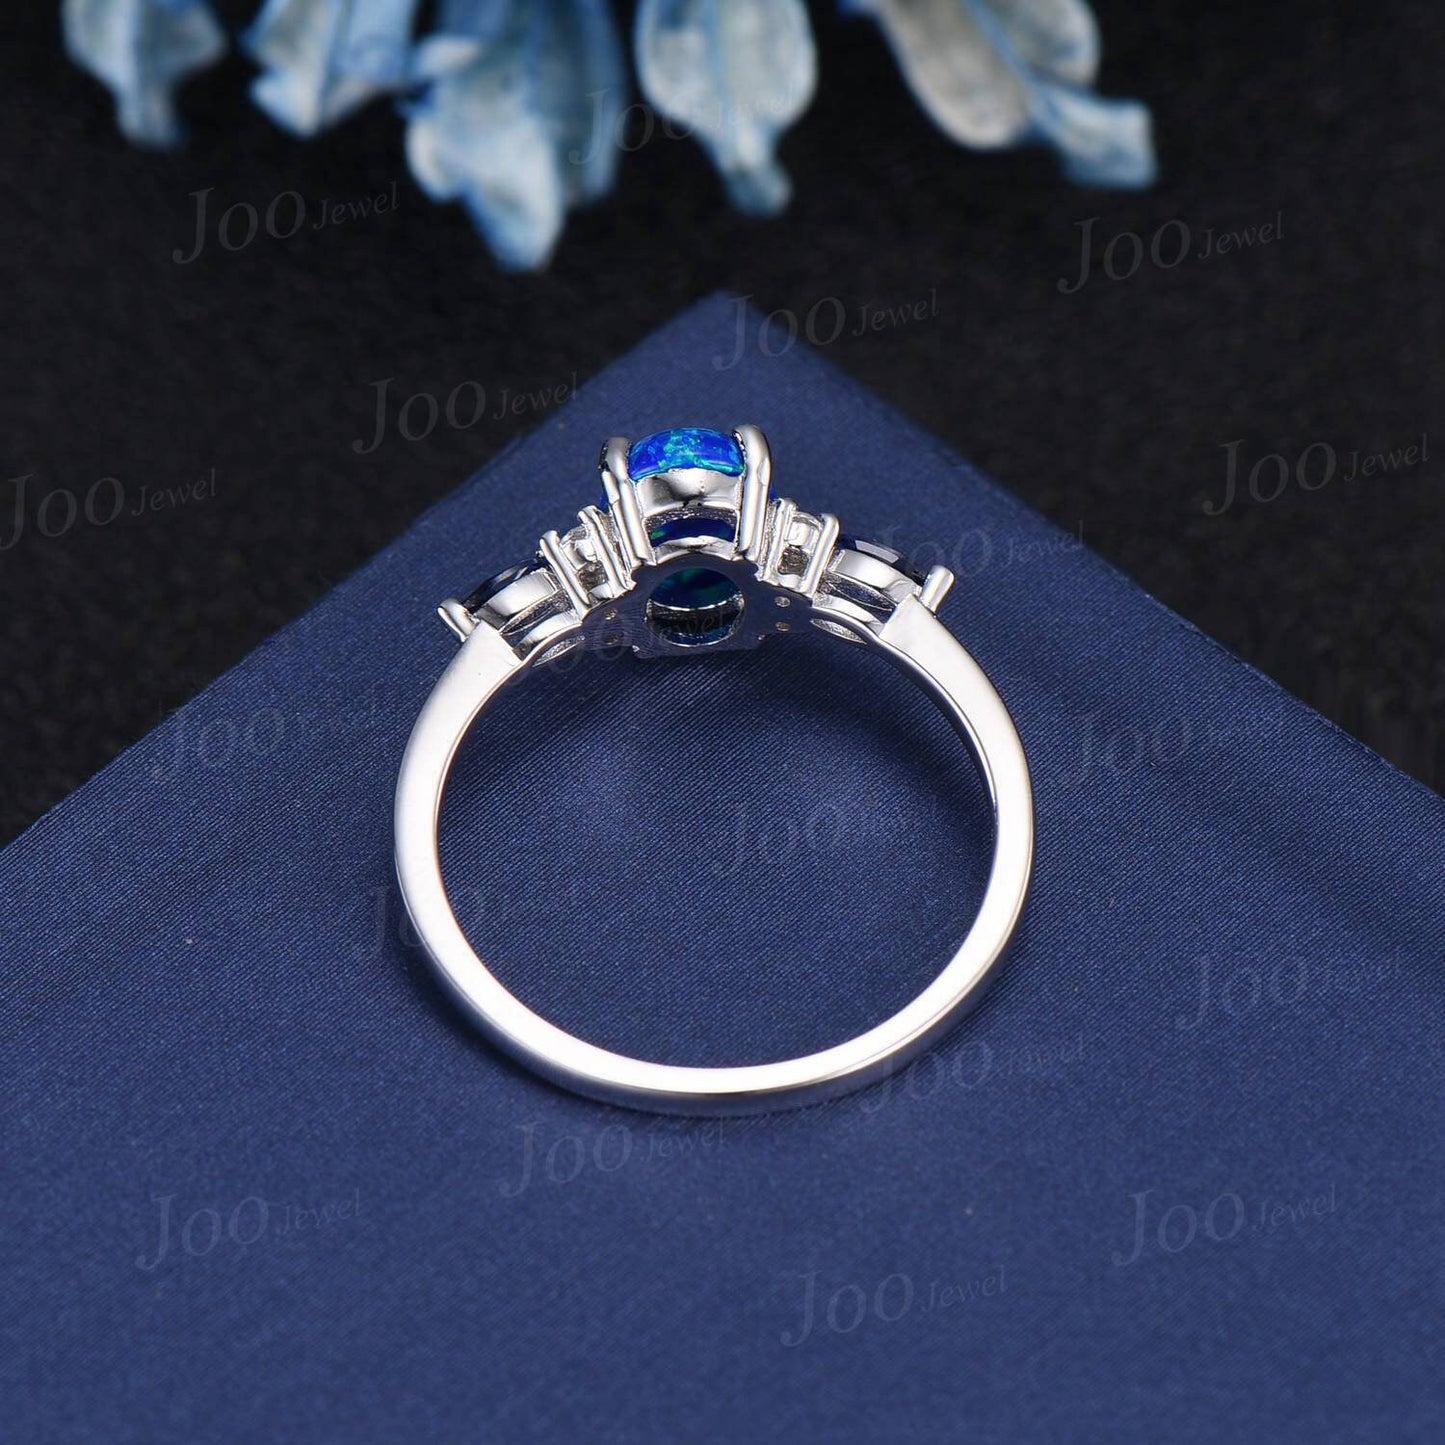 1.5ct Oval Blue Opal Engagement Ring Vintage Sterling Silver Blue Sapphire Wedding Ring Unique Anniversary Gift Moissanite Promise Rings